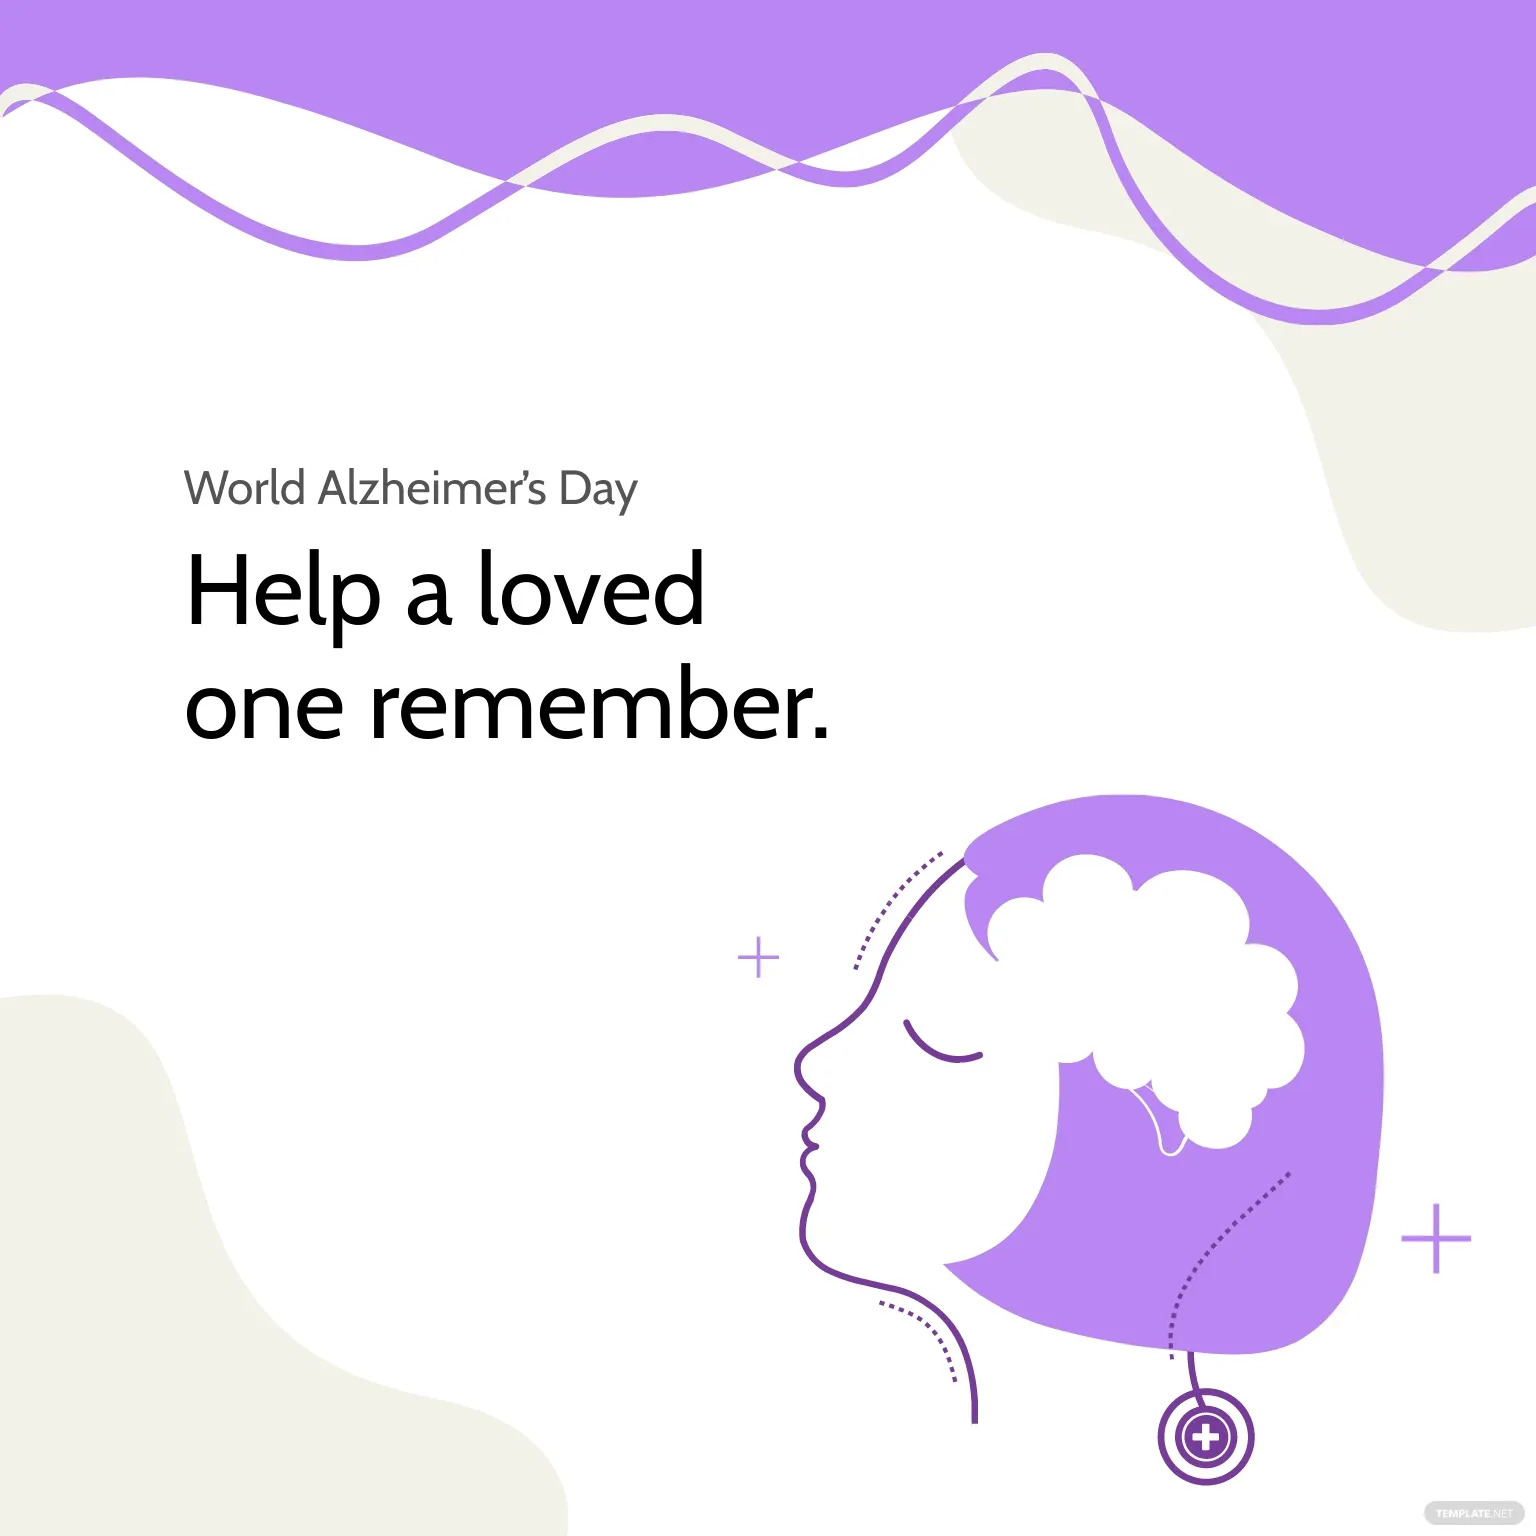 world alzheimer’s day poster vector ideas and examples